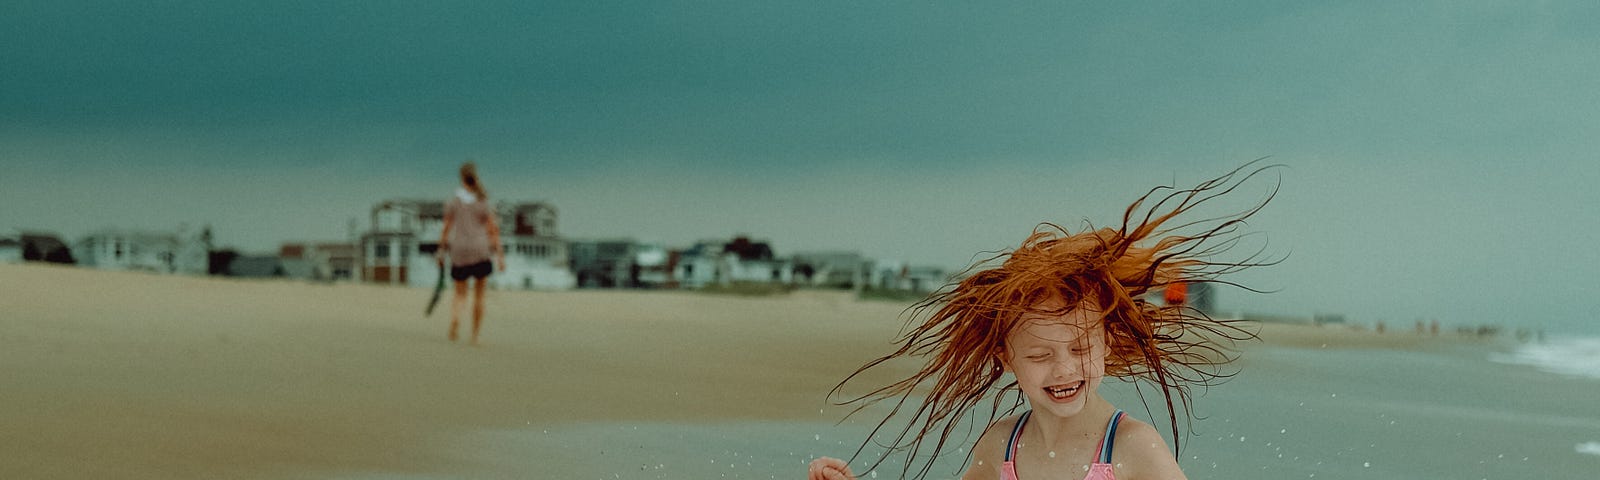 Red-headed girl cavorting in the surf at the beach.